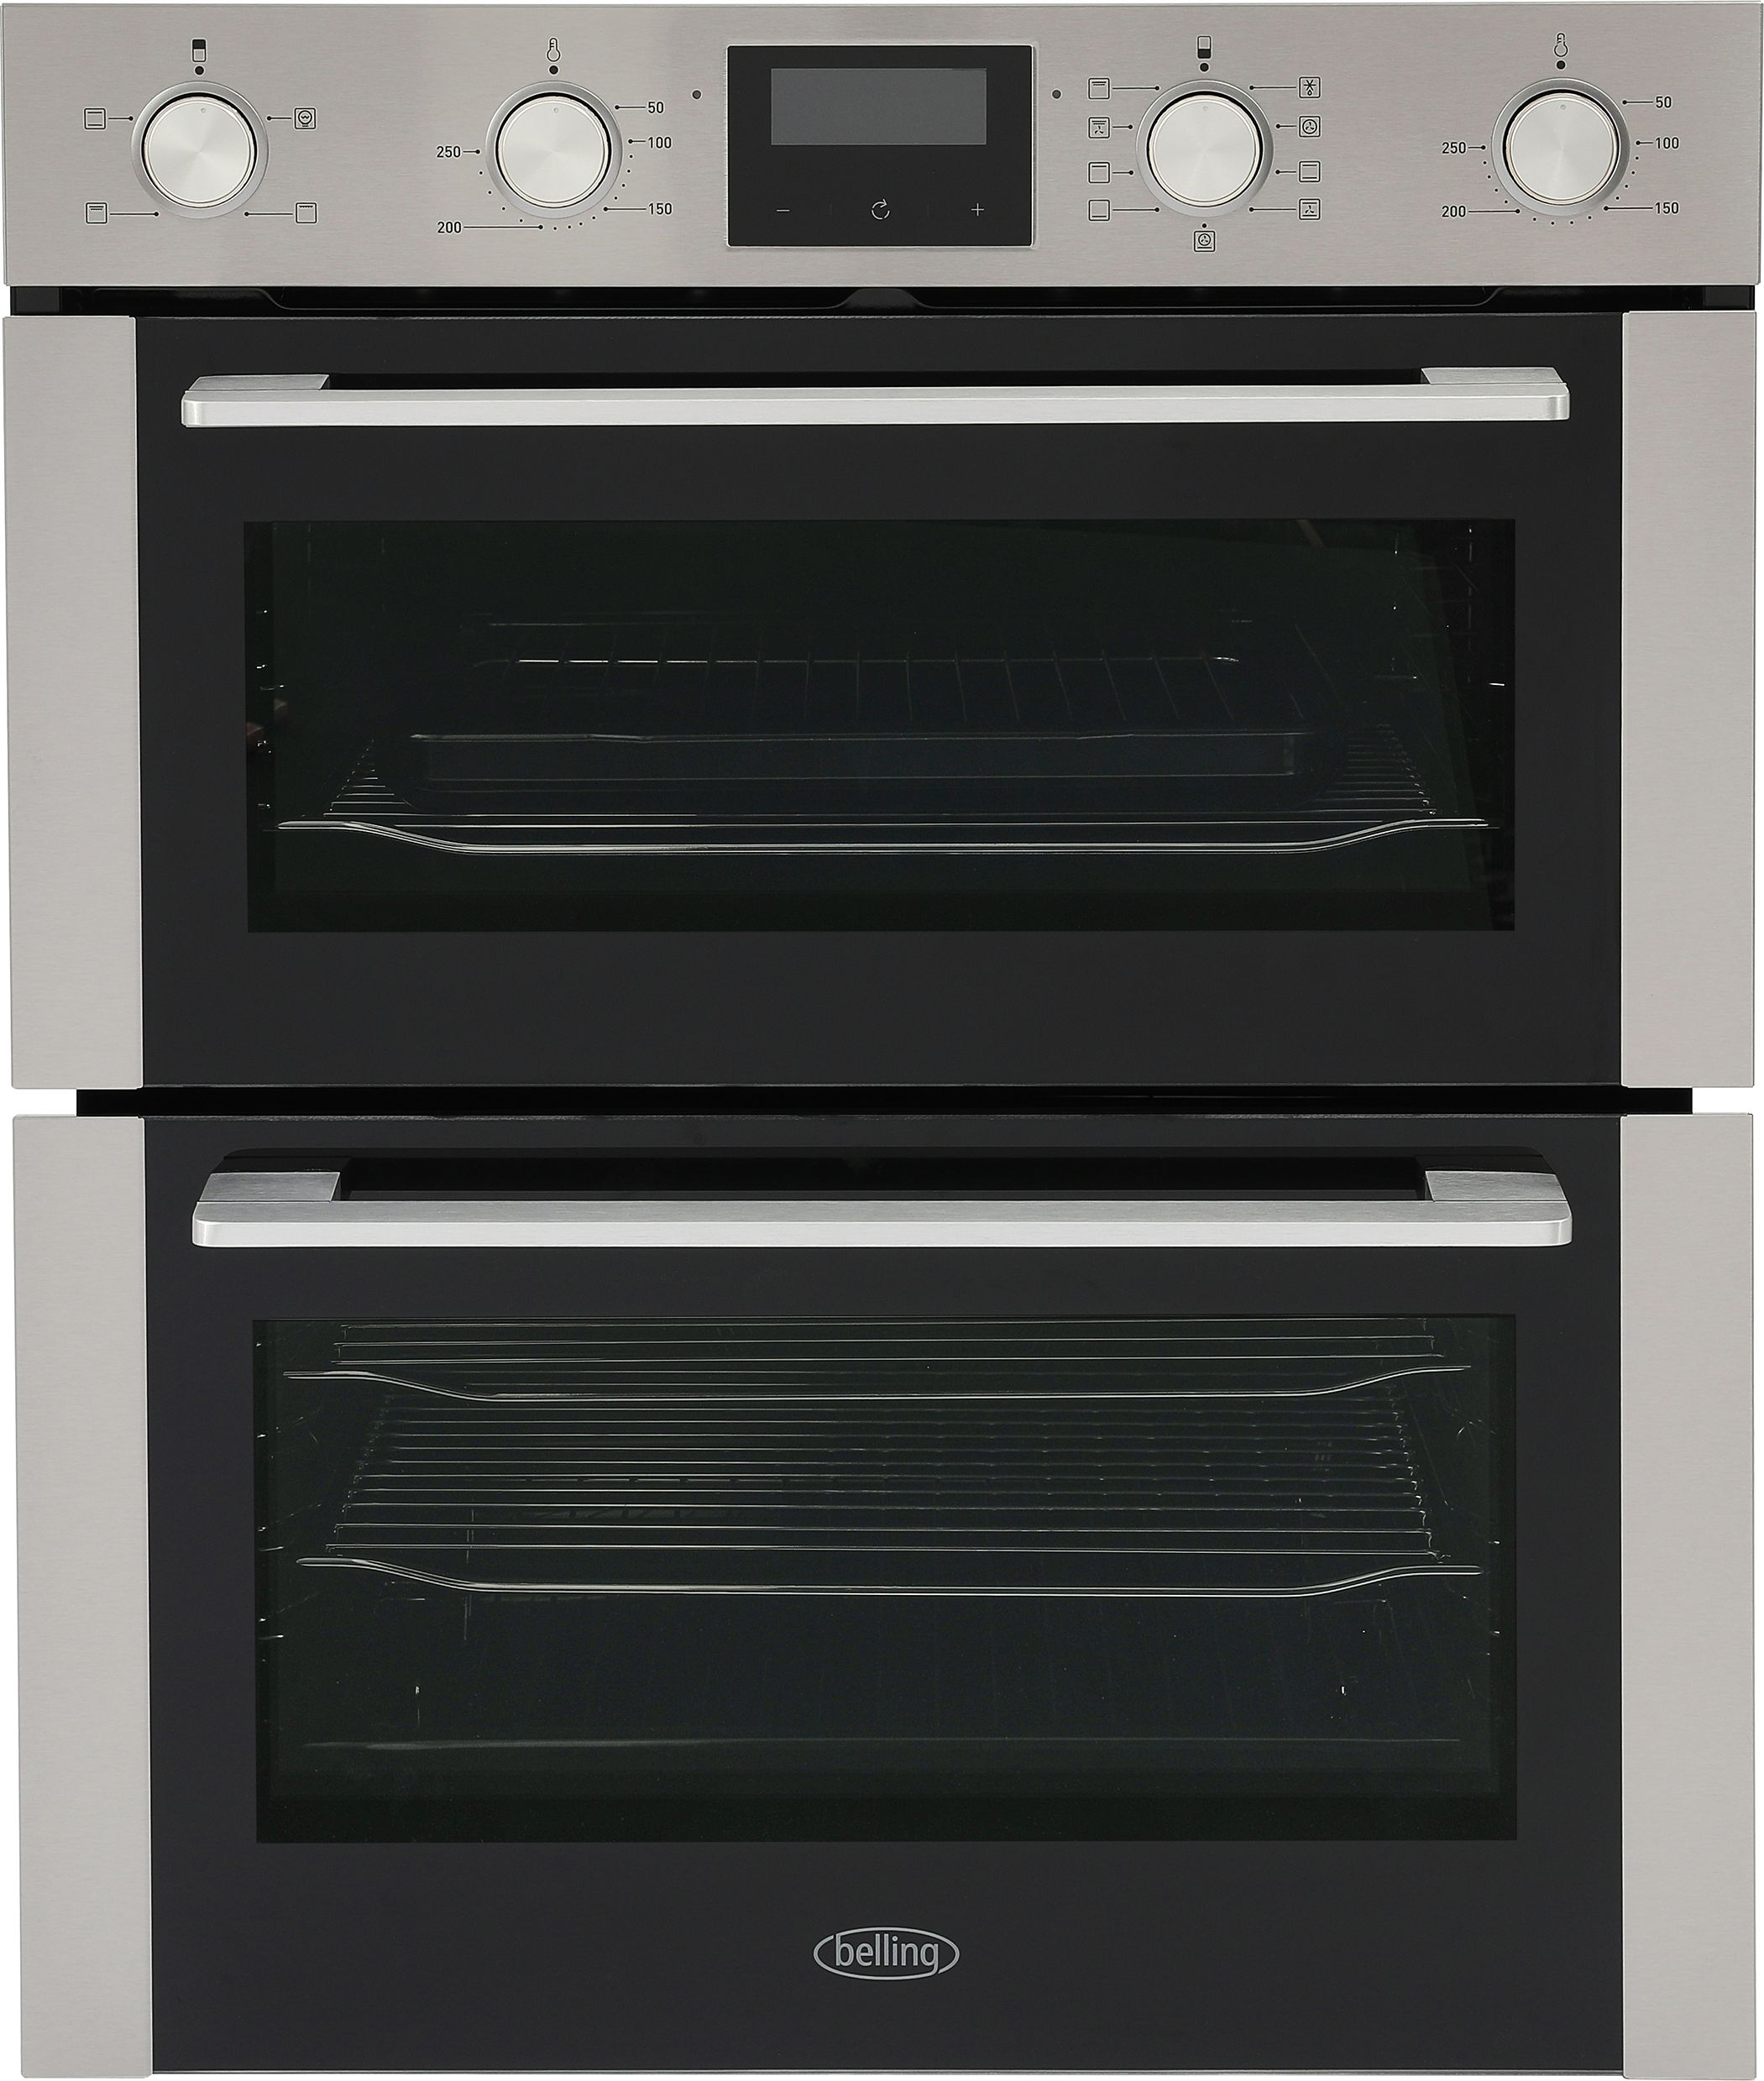 Belling ComfortCook BEL BI703MFC Built Under Electric Double Oven - Stainless Steel - A/A Rated, Stainless Steel